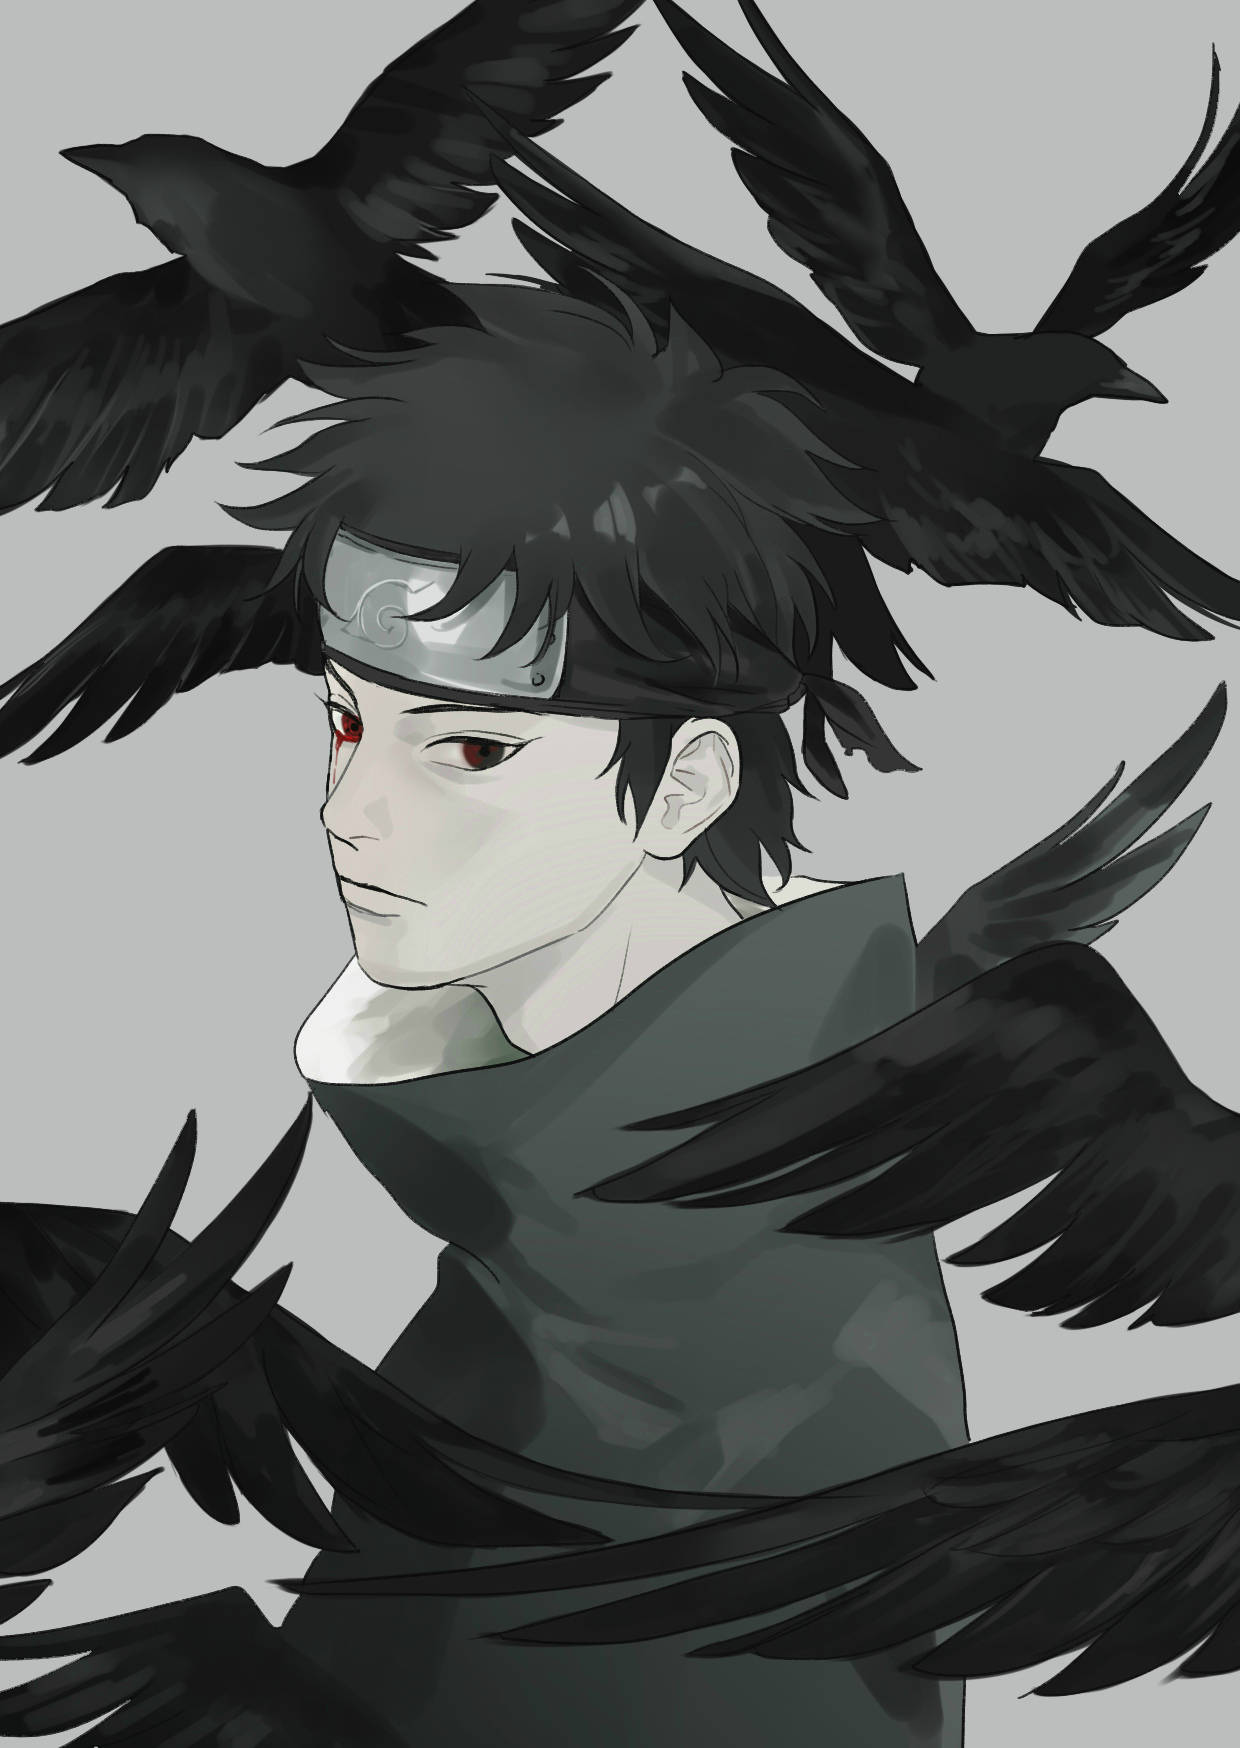 Shisui With Black Crows